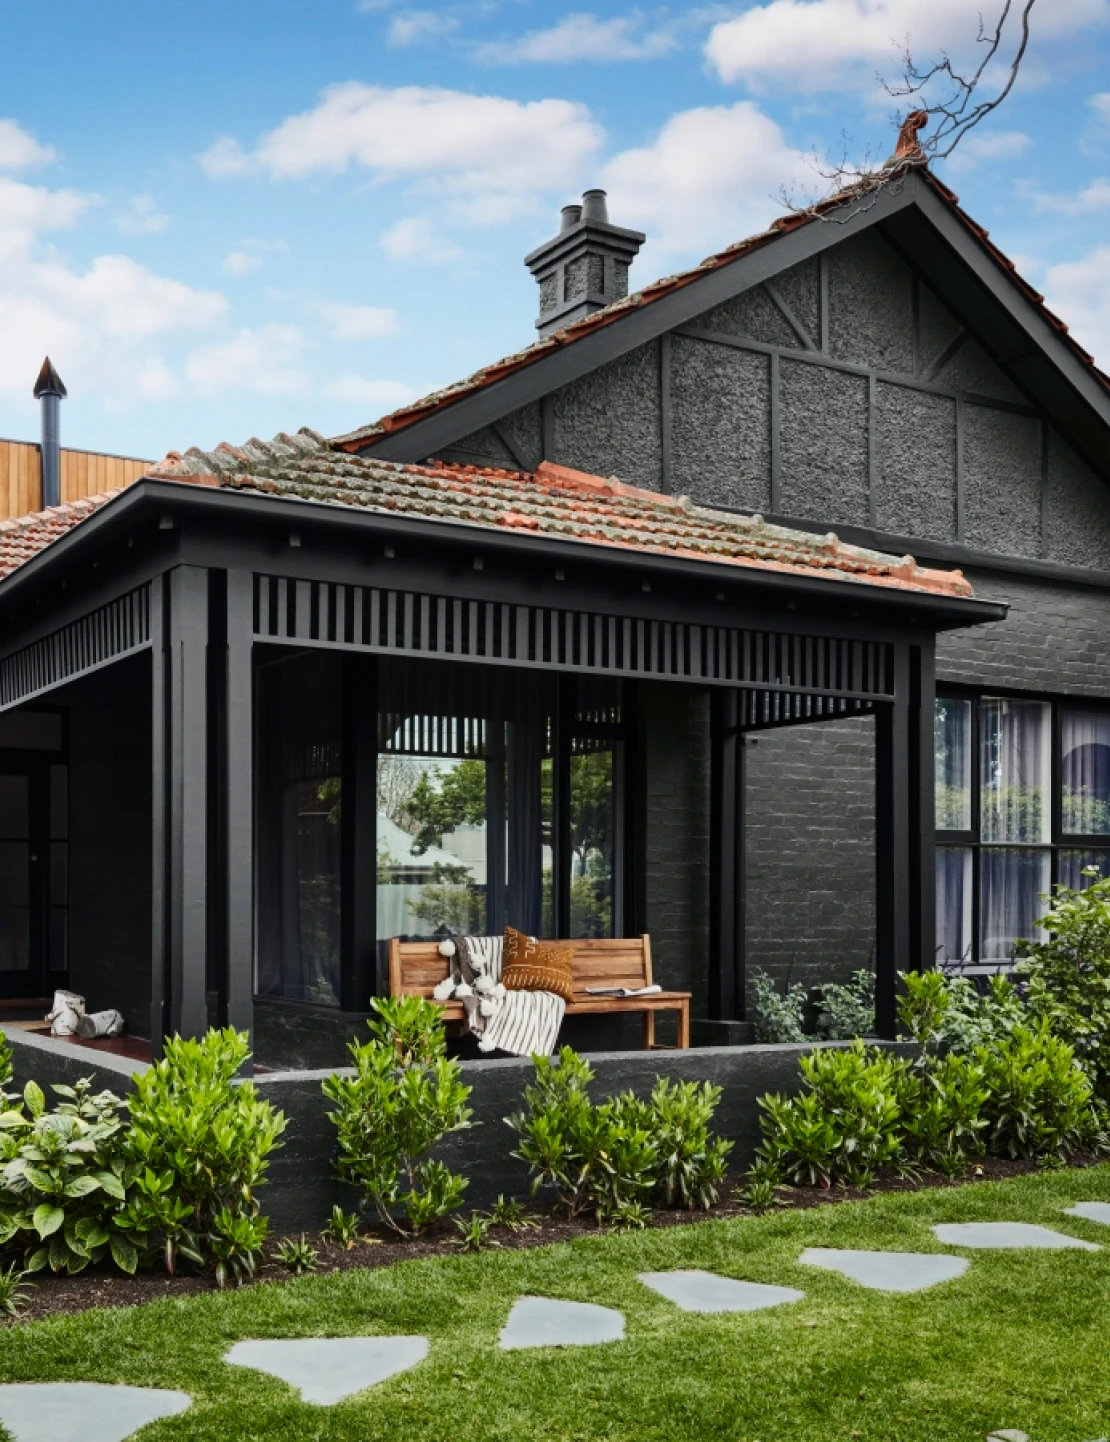 Dark exterior style house with Dulux Rāwene and Castlecliff colours and a green garden.